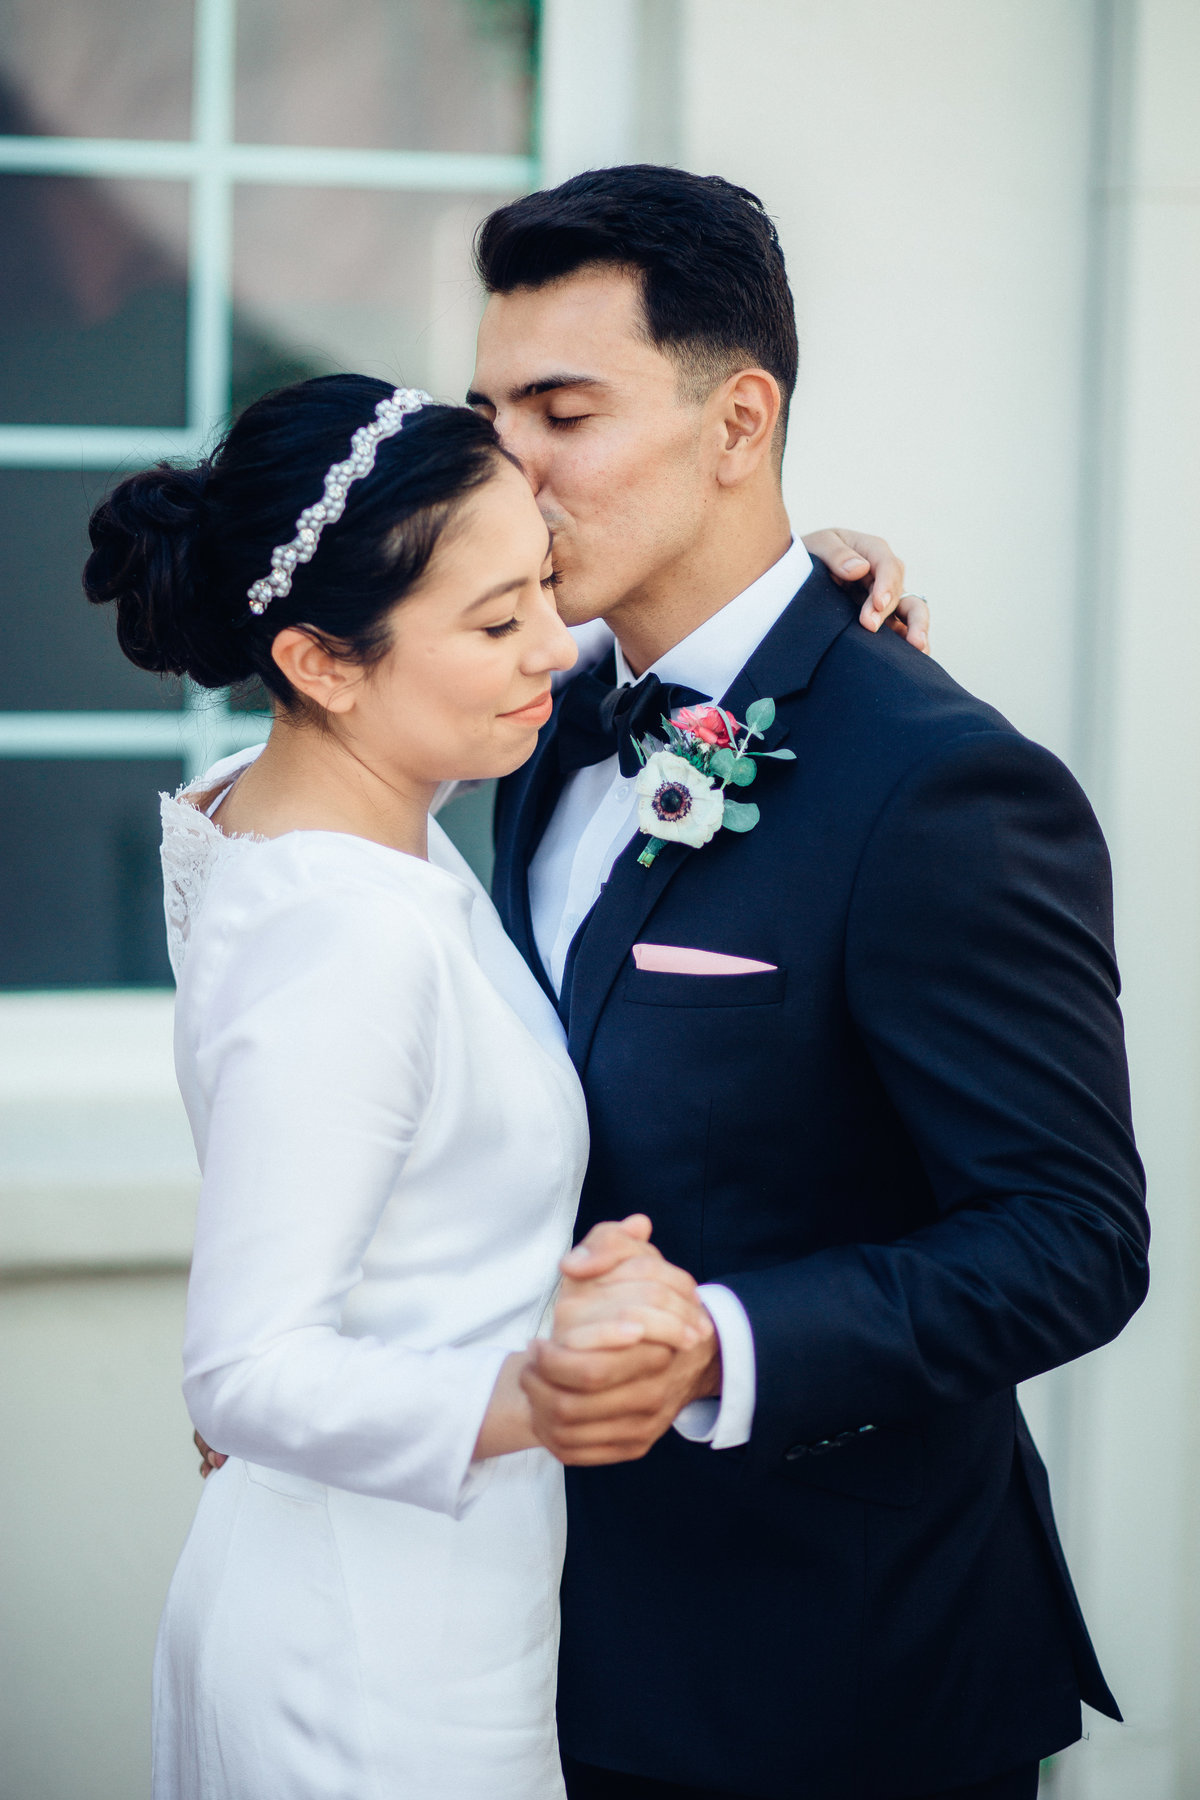 Wedding Photograph Of Groom Kissing His Bride in The Forehead While Dancing Los Angeles